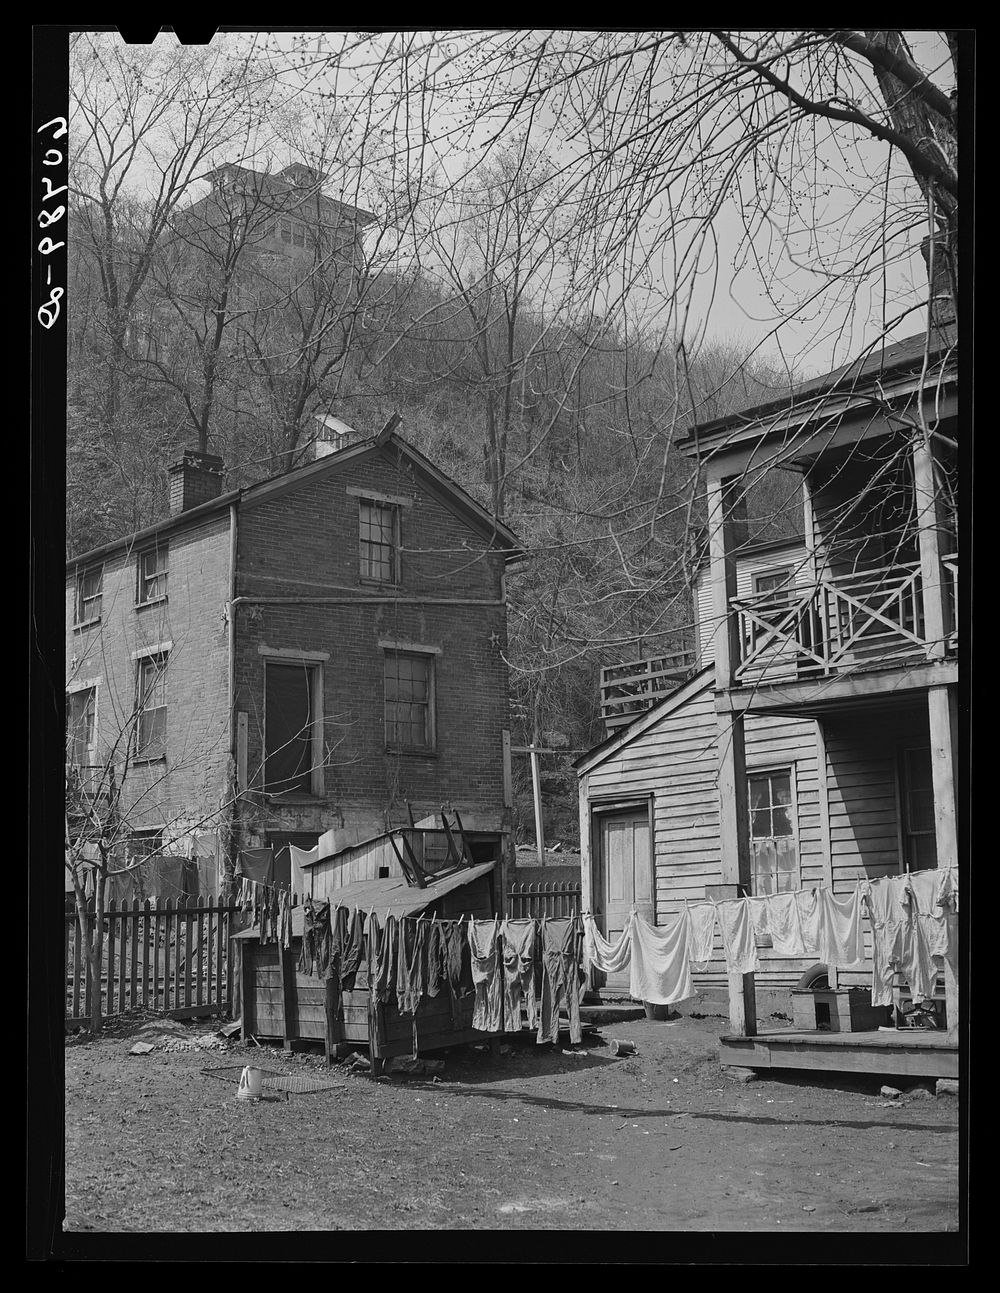 Houses at foot of bluff. Dubuque, Iowa. Sourced from the Library of Congress.